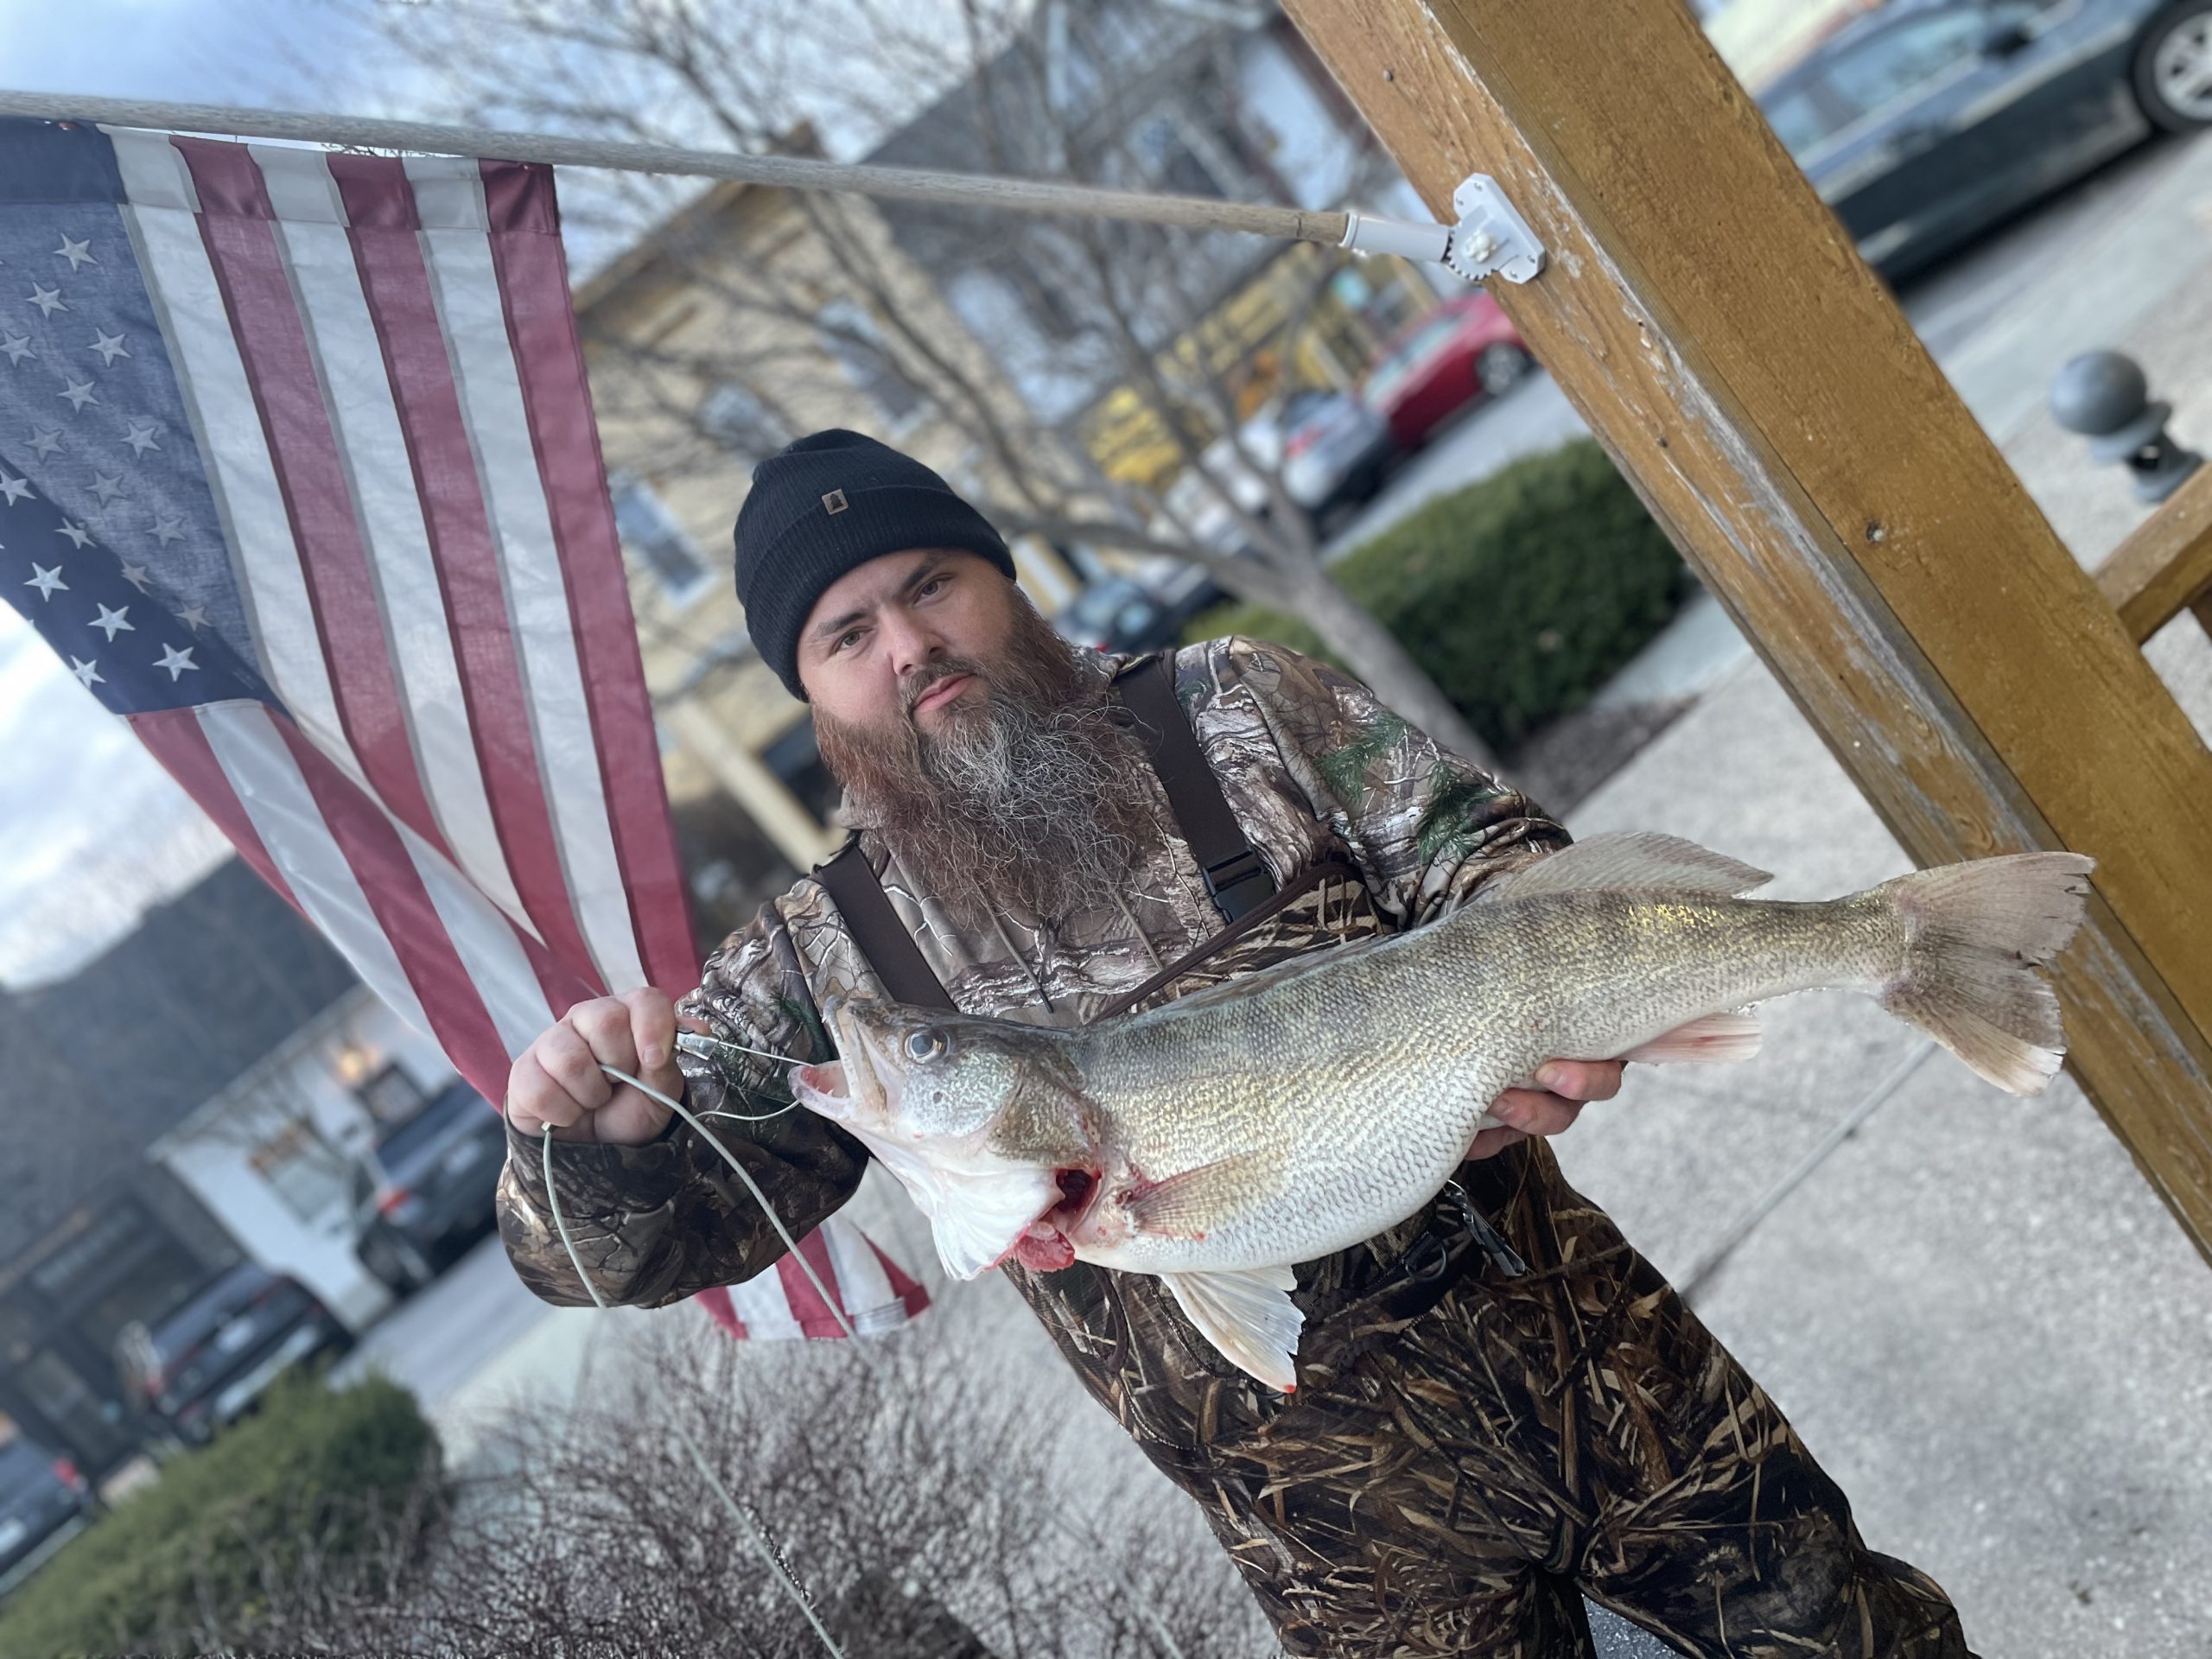 Maumee river report-25 march 2022